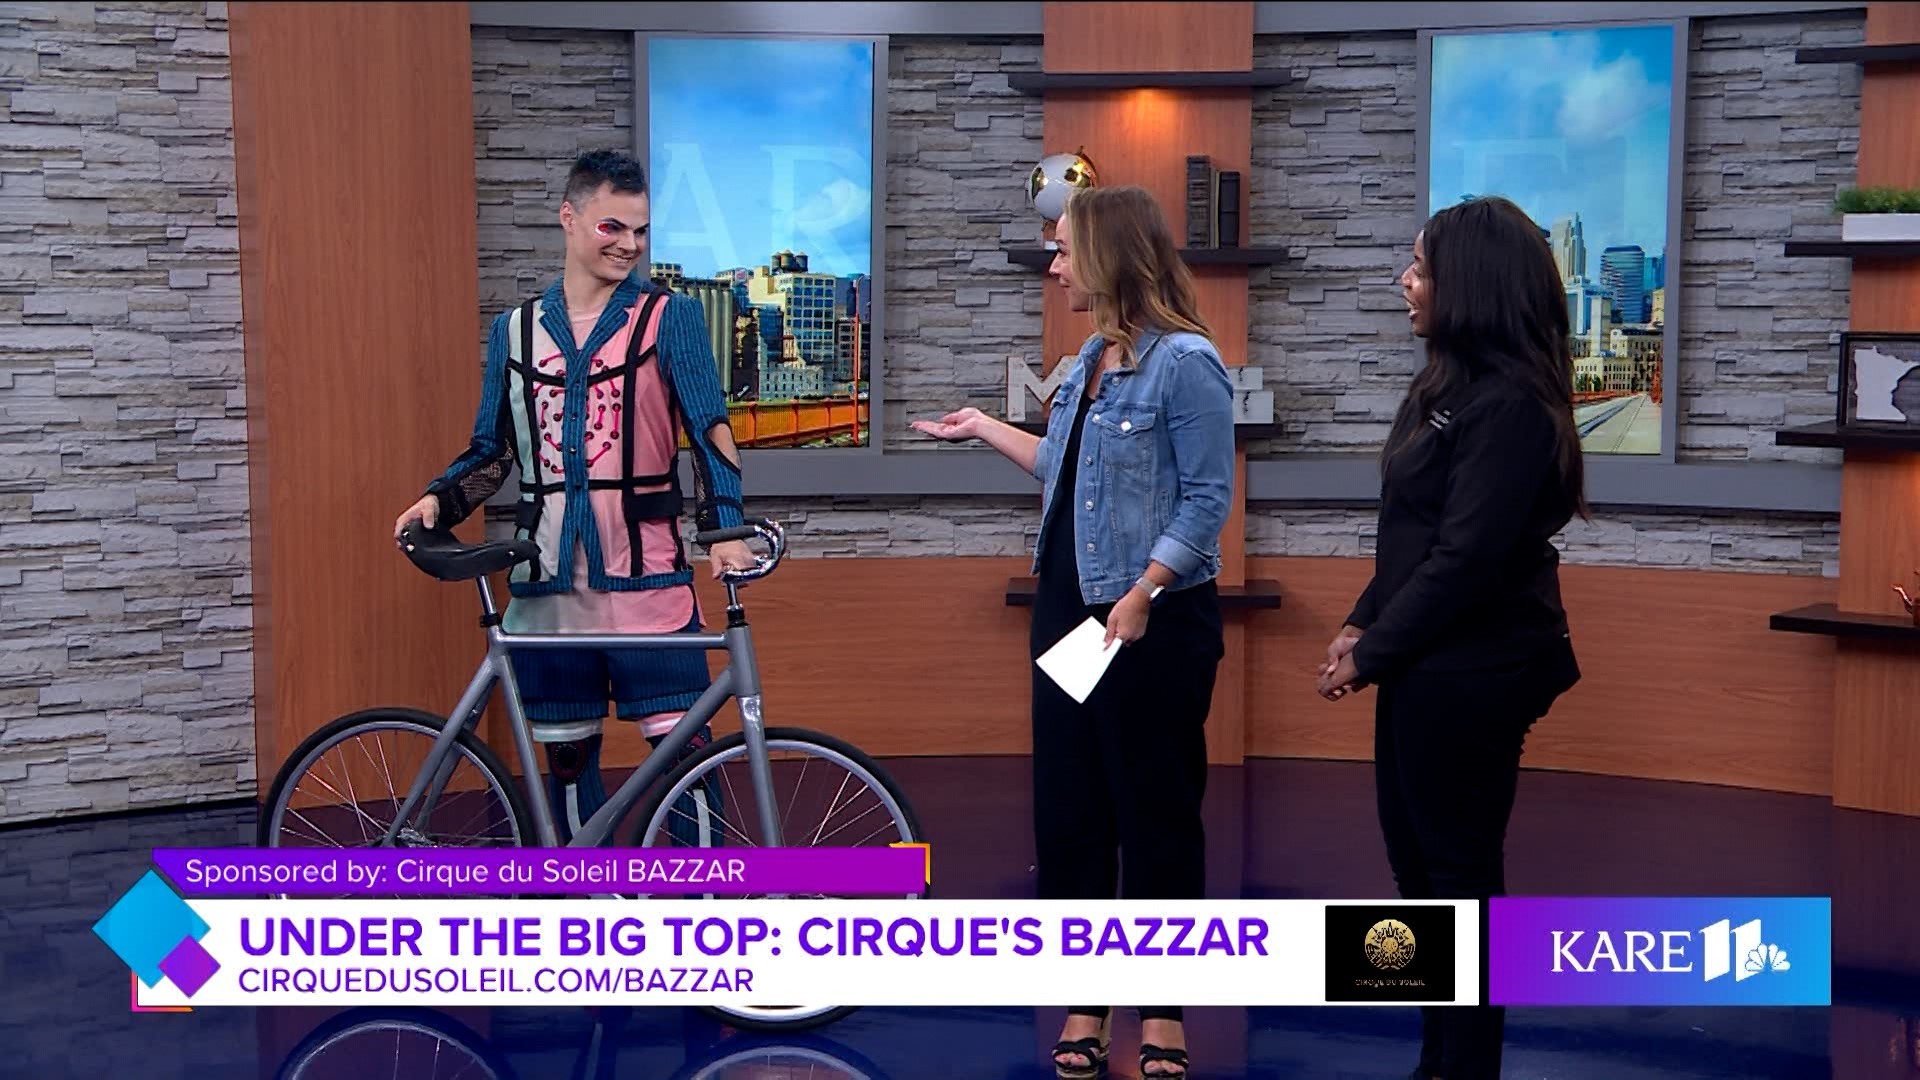 Cirque du Soleil BAZZAR joins Minnesota and Company to invite audiences to immerse themselves in a marketplace of boundless enthusiasm and artistic camaraderie.